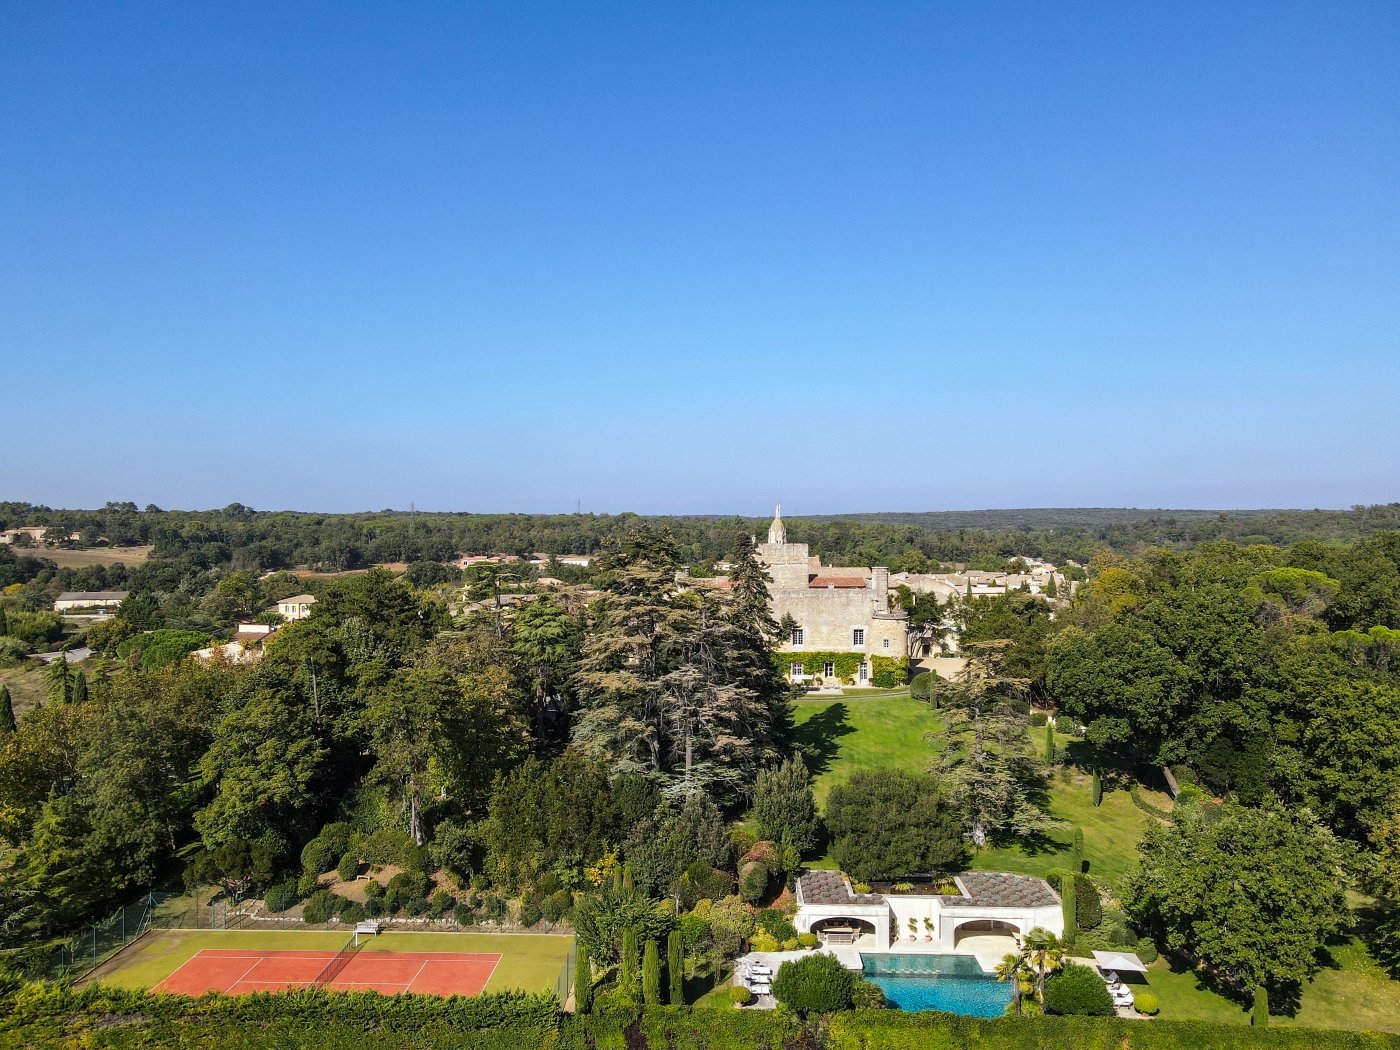 Castle to rent in Uzes in the Var for your vacations and seminars